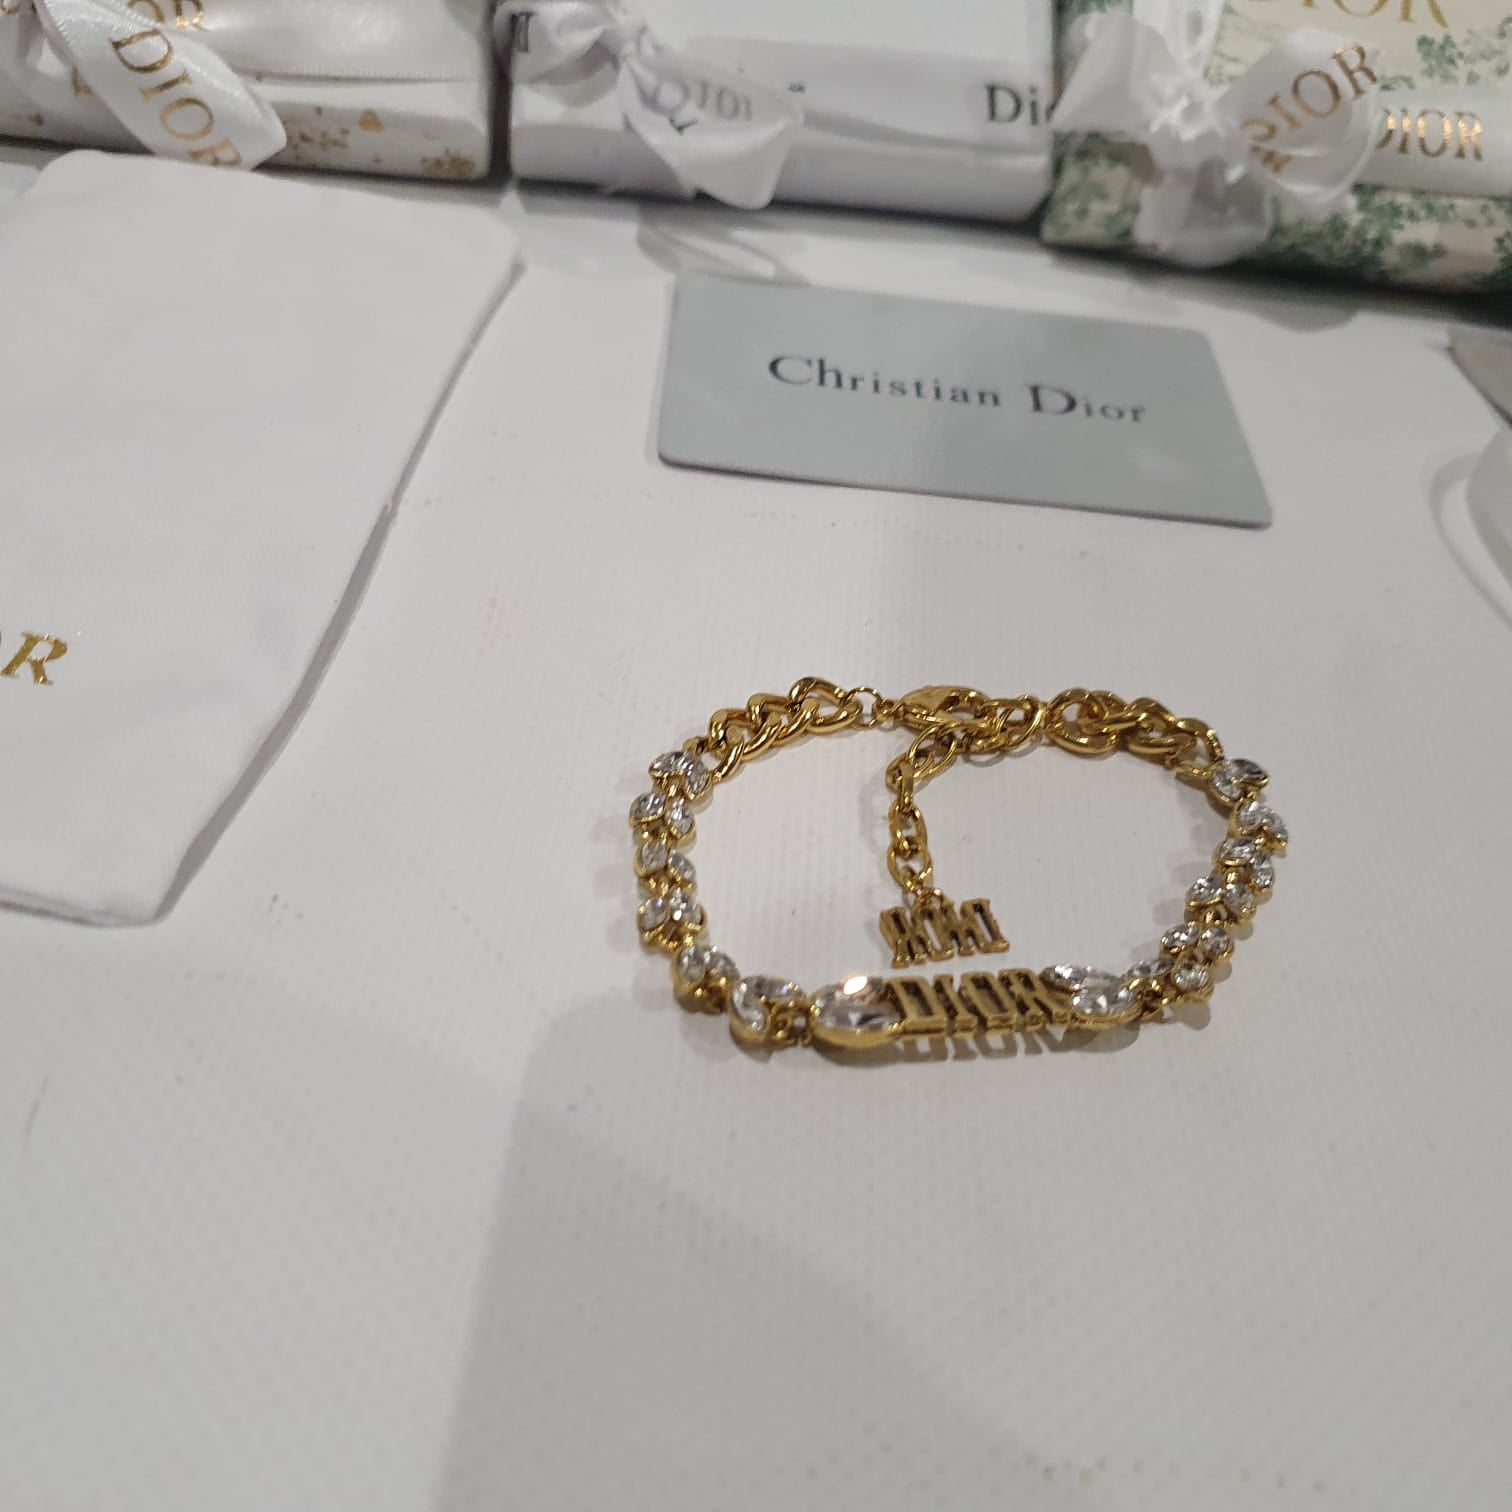 Christian Dior Necklace, bracelet and earrings